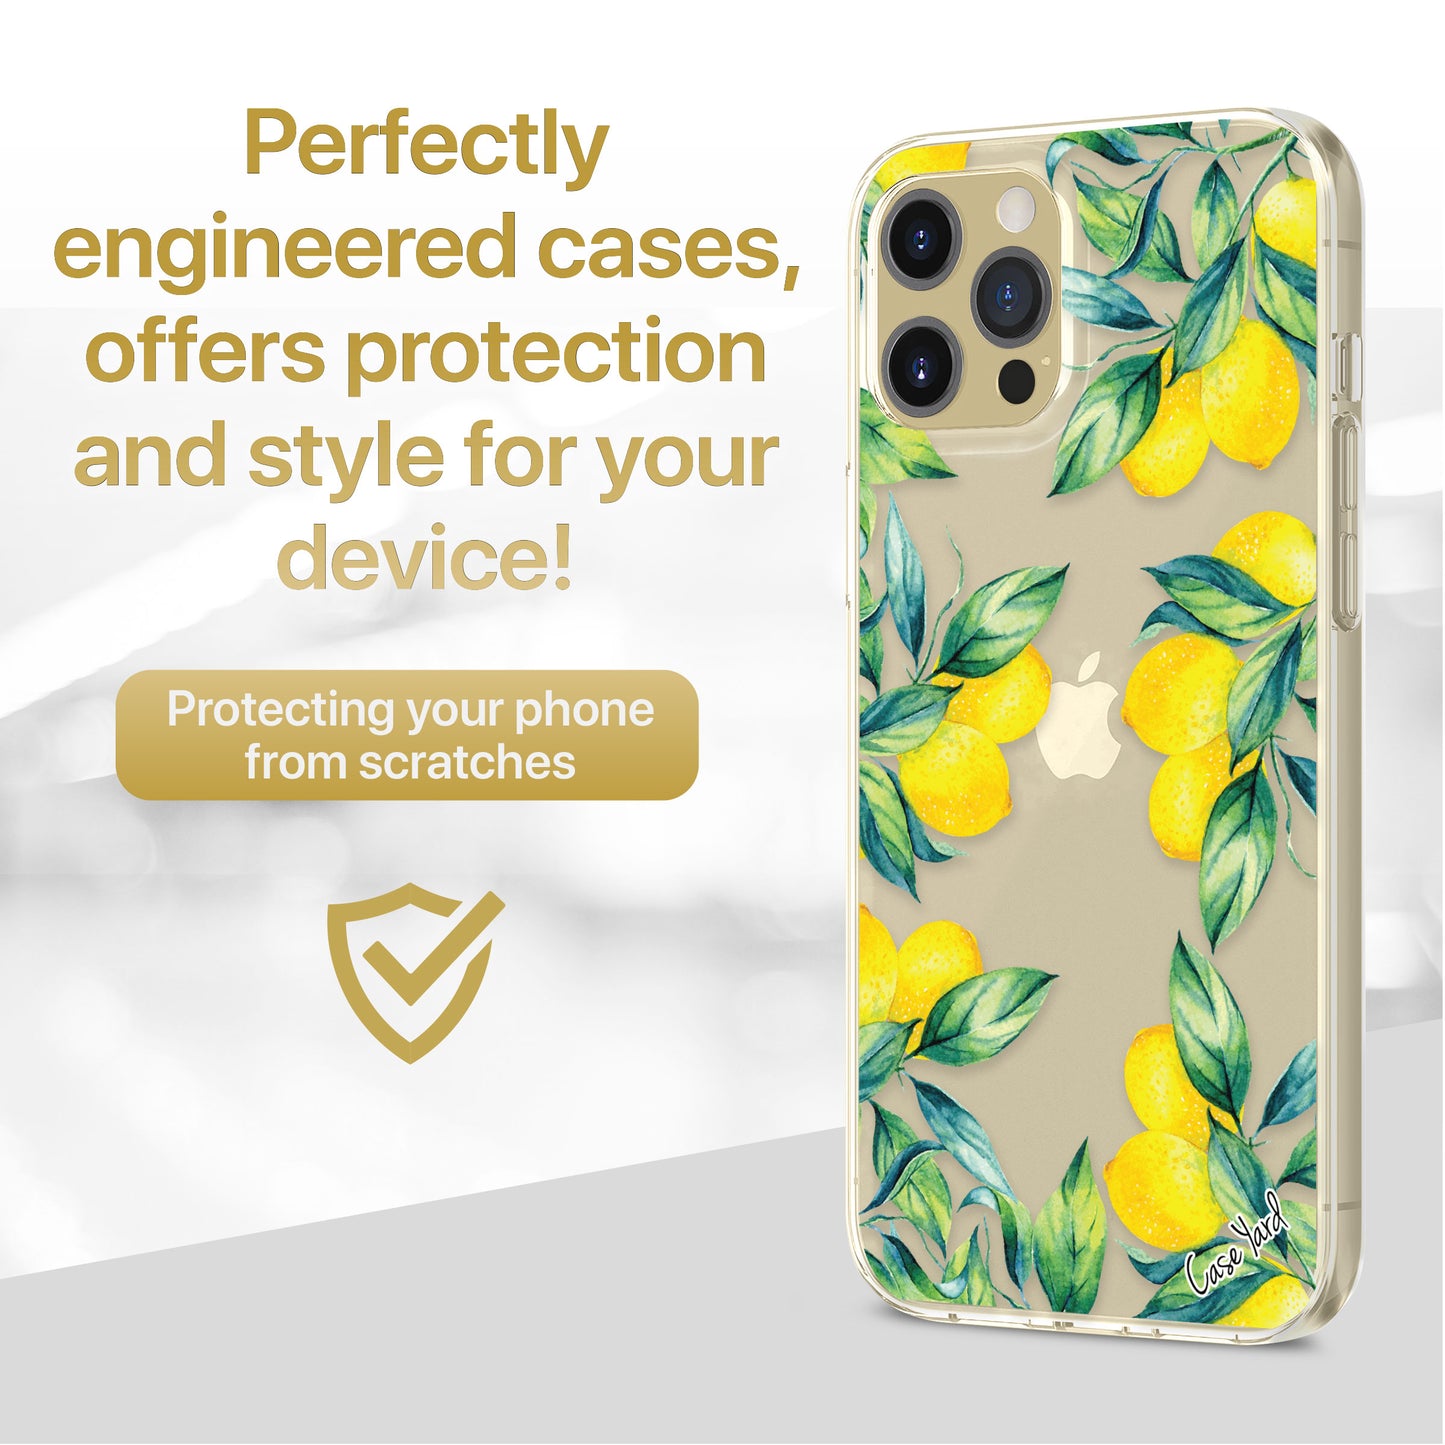 TPU Clear case with (Lemons) Design for iPhone & Samsung Phones